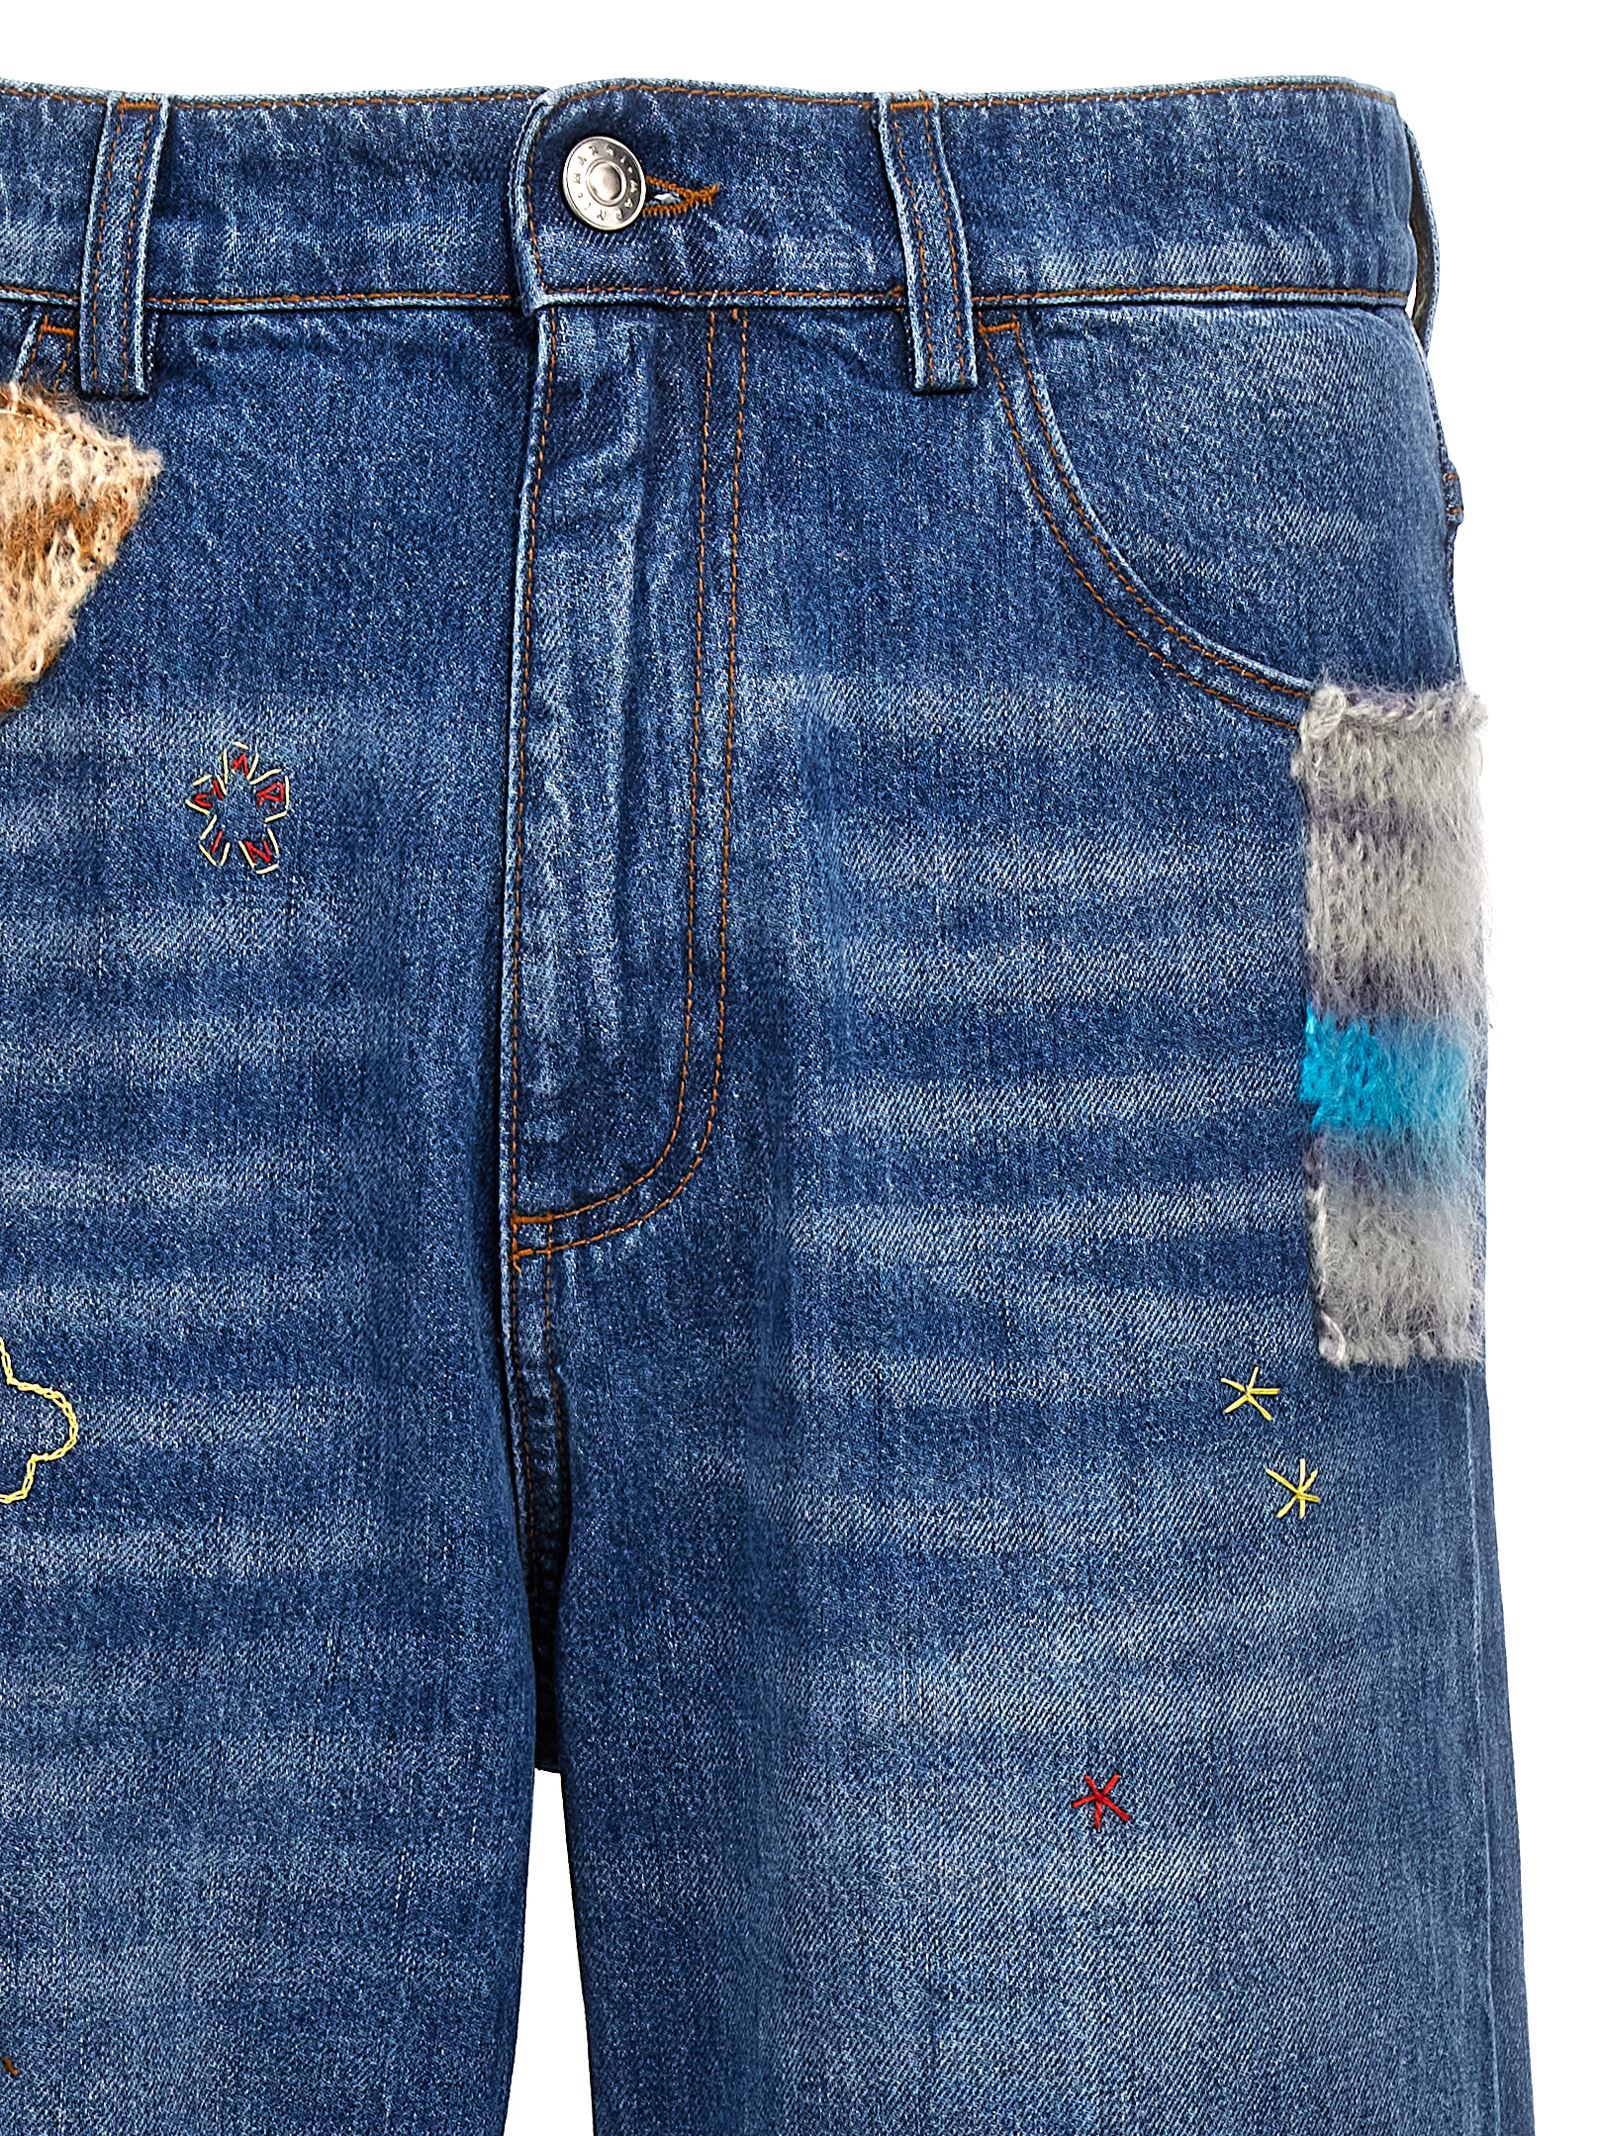 Shop Marni Embroidery Jeans And Patches In Blue